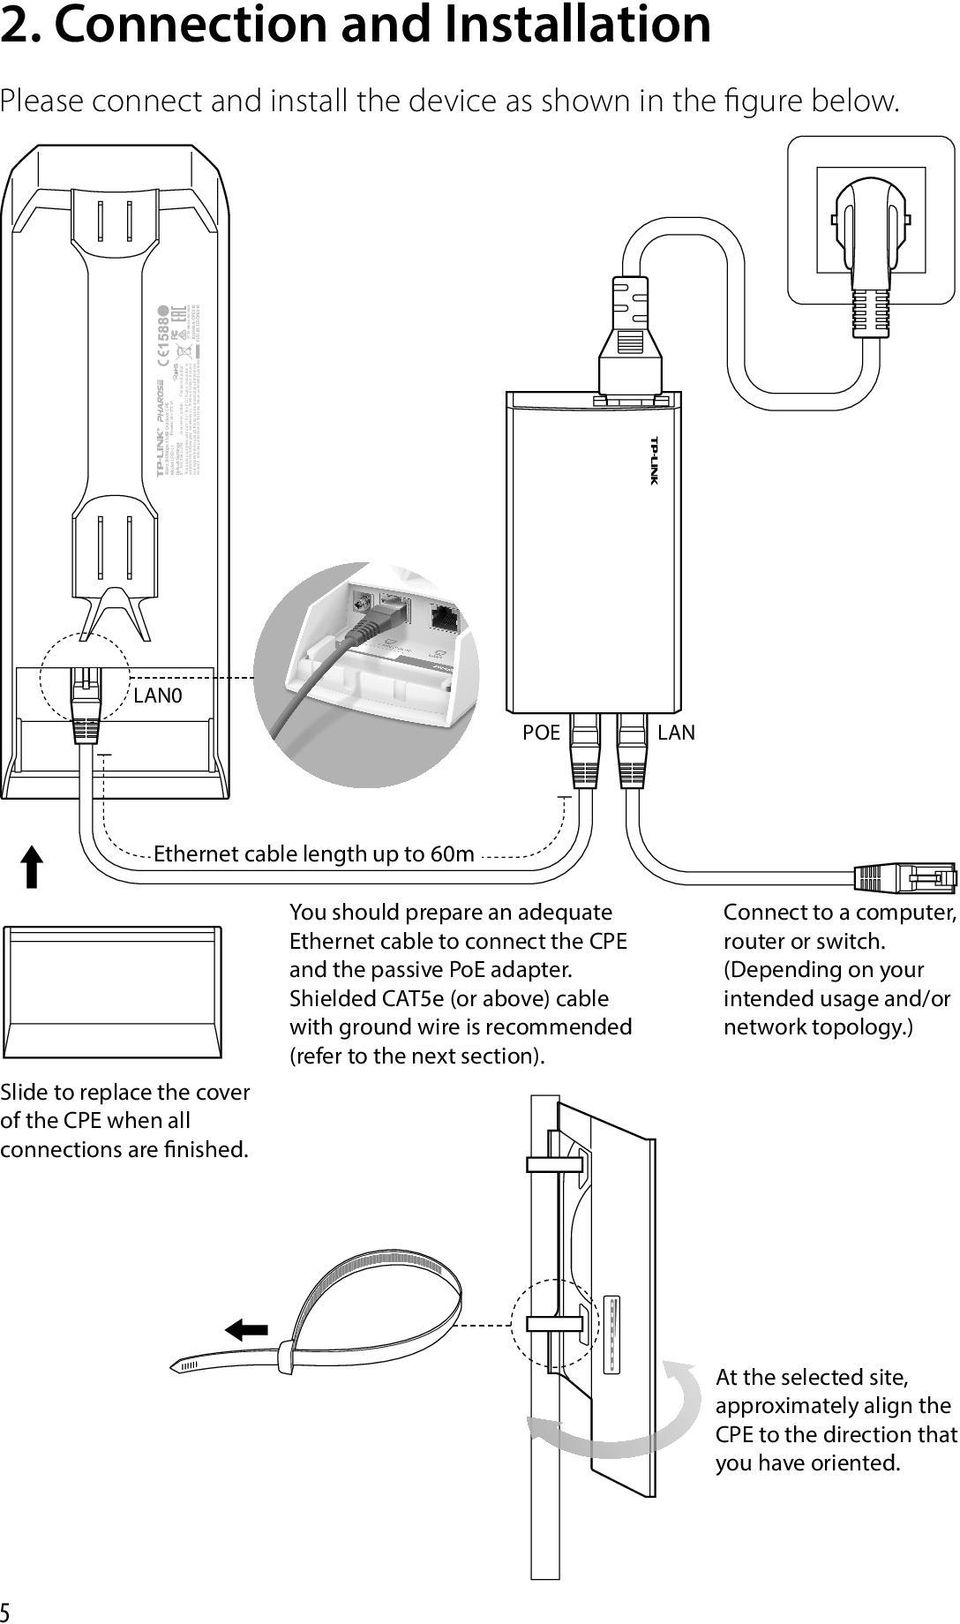 including interference that may cause undesired operation. FCC ID:TE7CPE510 LAN0 POE LAN Ethernet cable length up to 60m Slide to replace the cover of the CPE when all connections are finished.